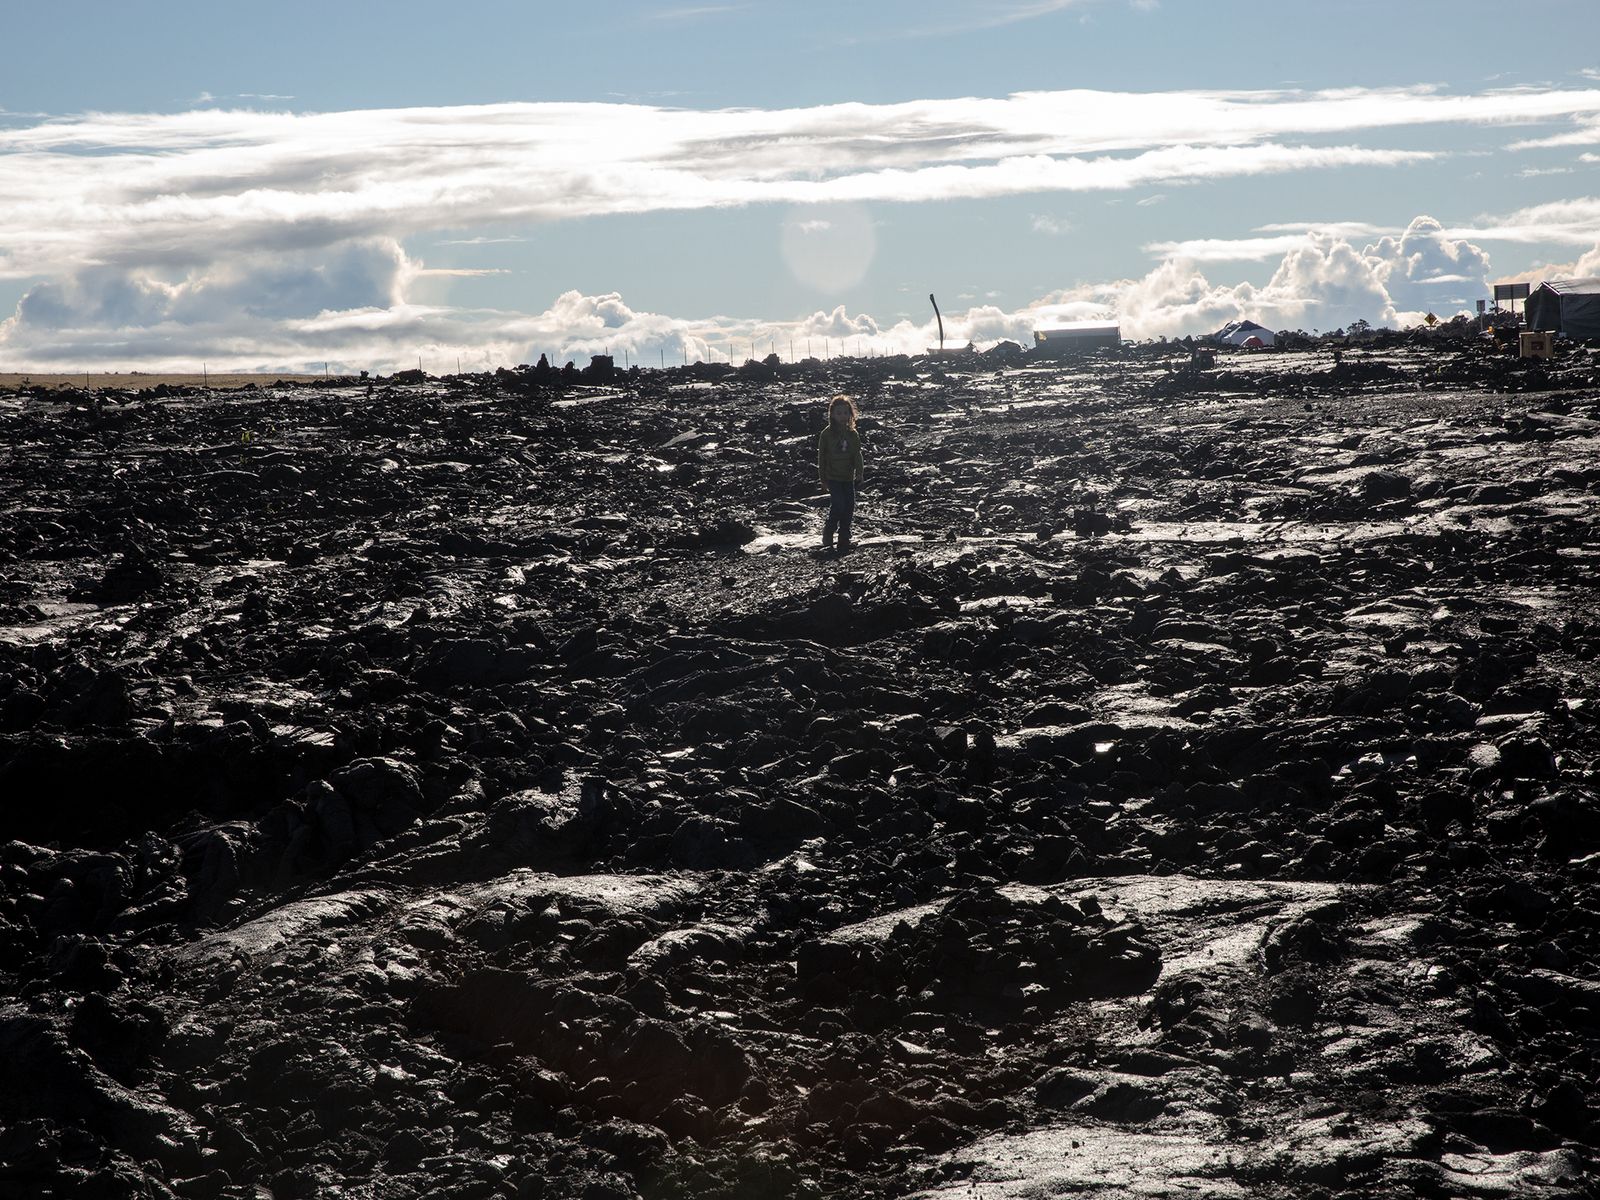 © Molly Peters - A child wanders out on the lava flow.